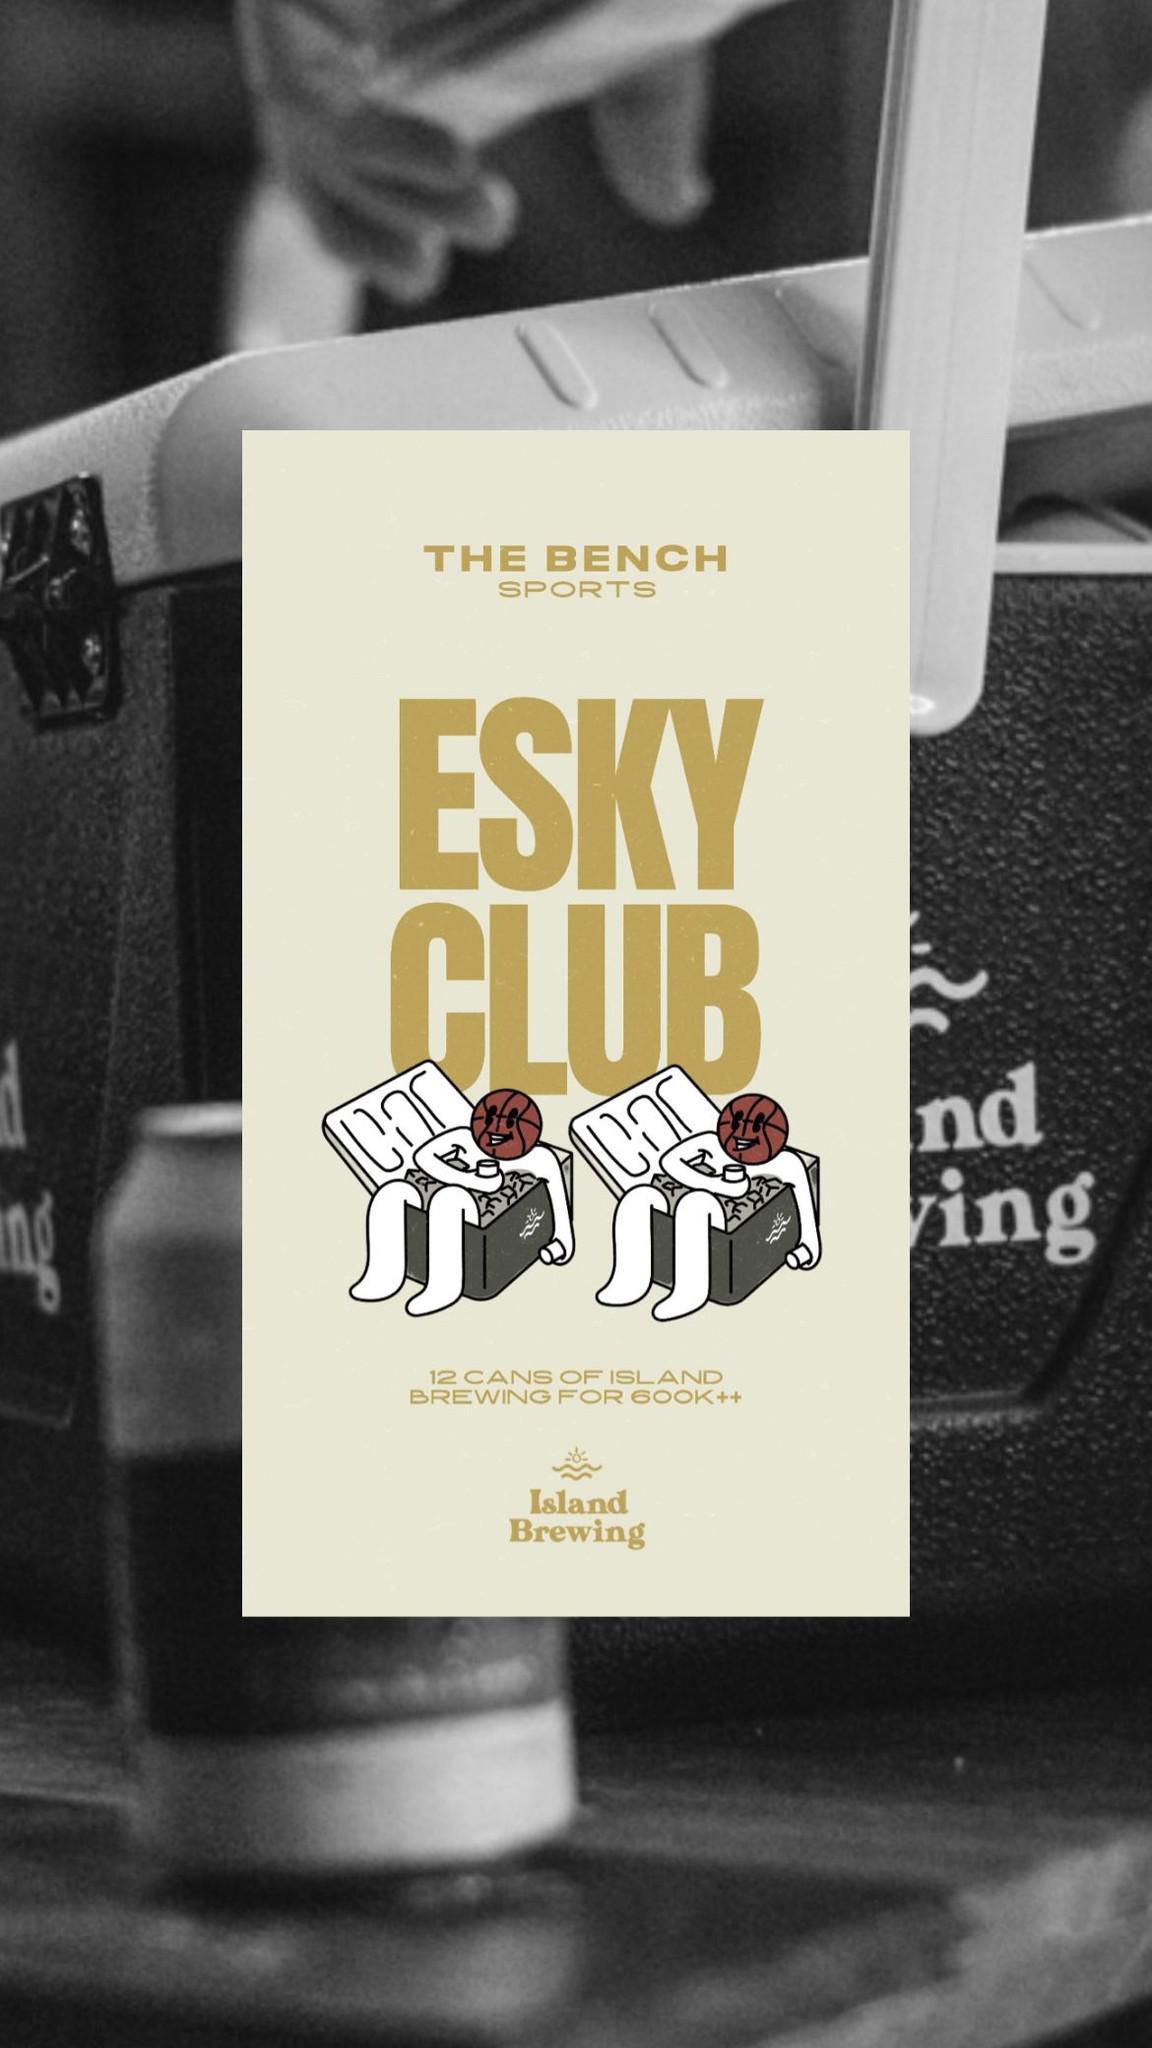 Esky Club at The Bench with Island Brewing